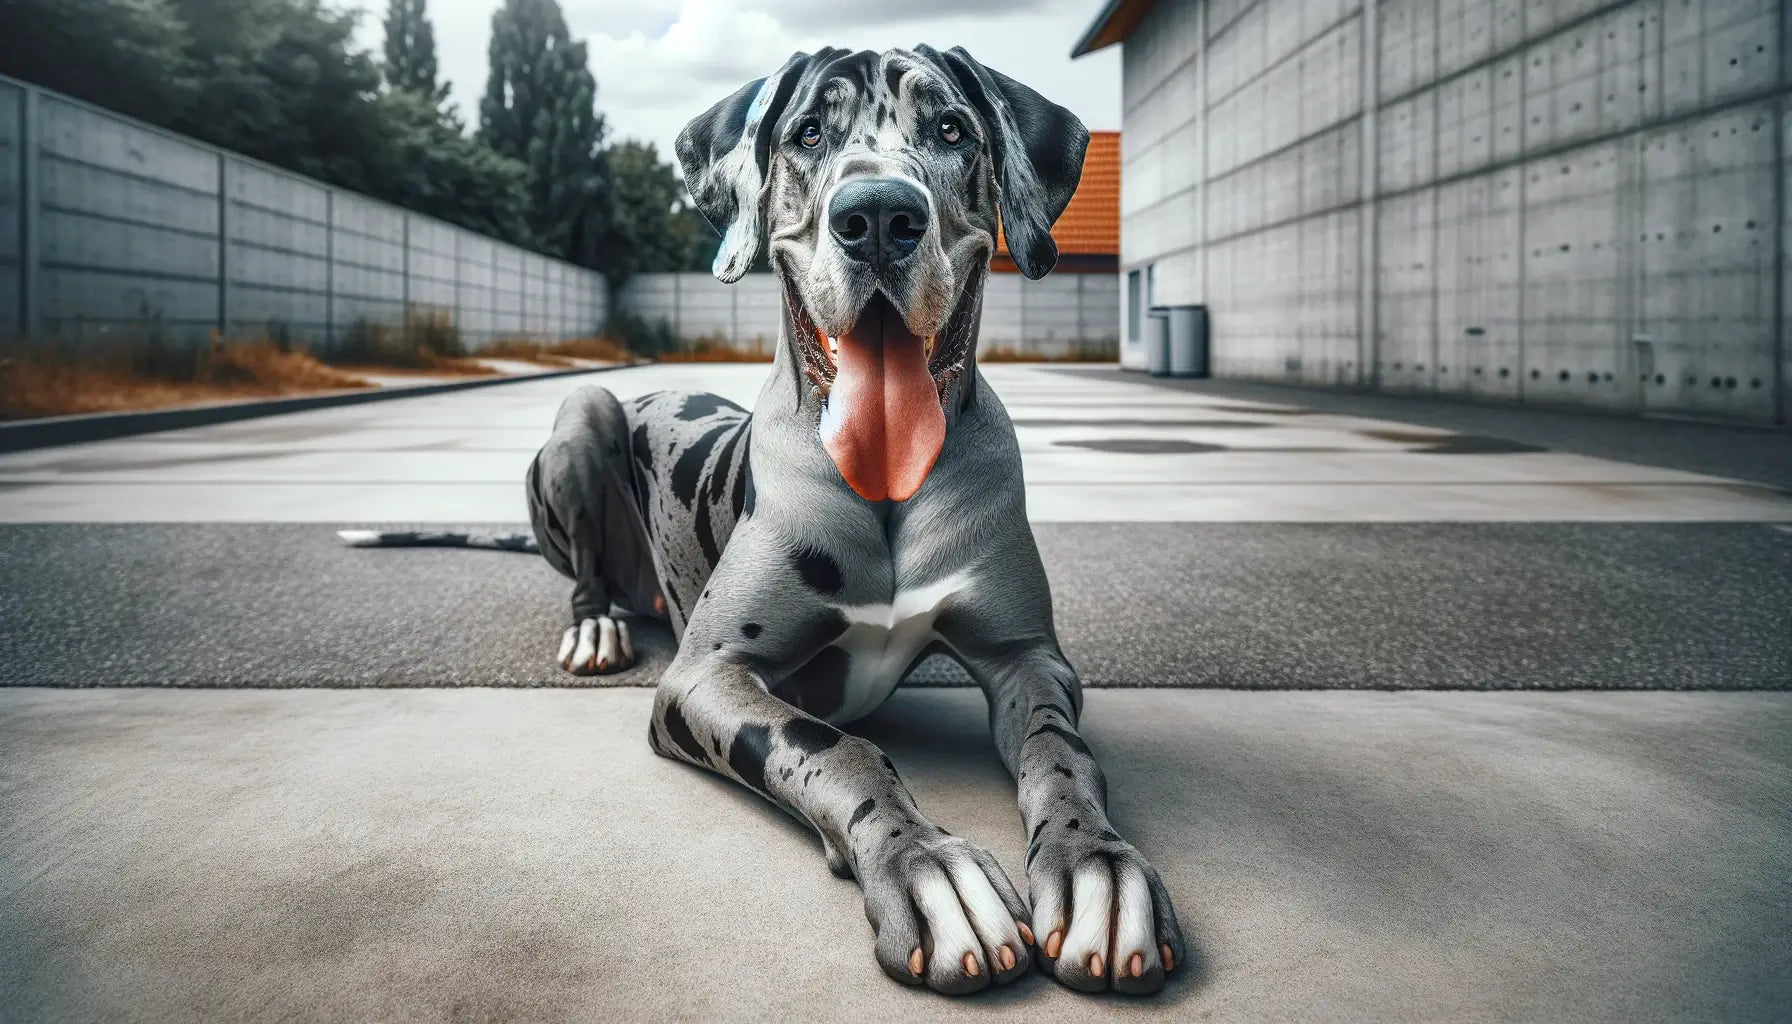 A Merle Great Dane on concrete pavement, its playful tongue-out smile showcasing a friendly and engaging personality.